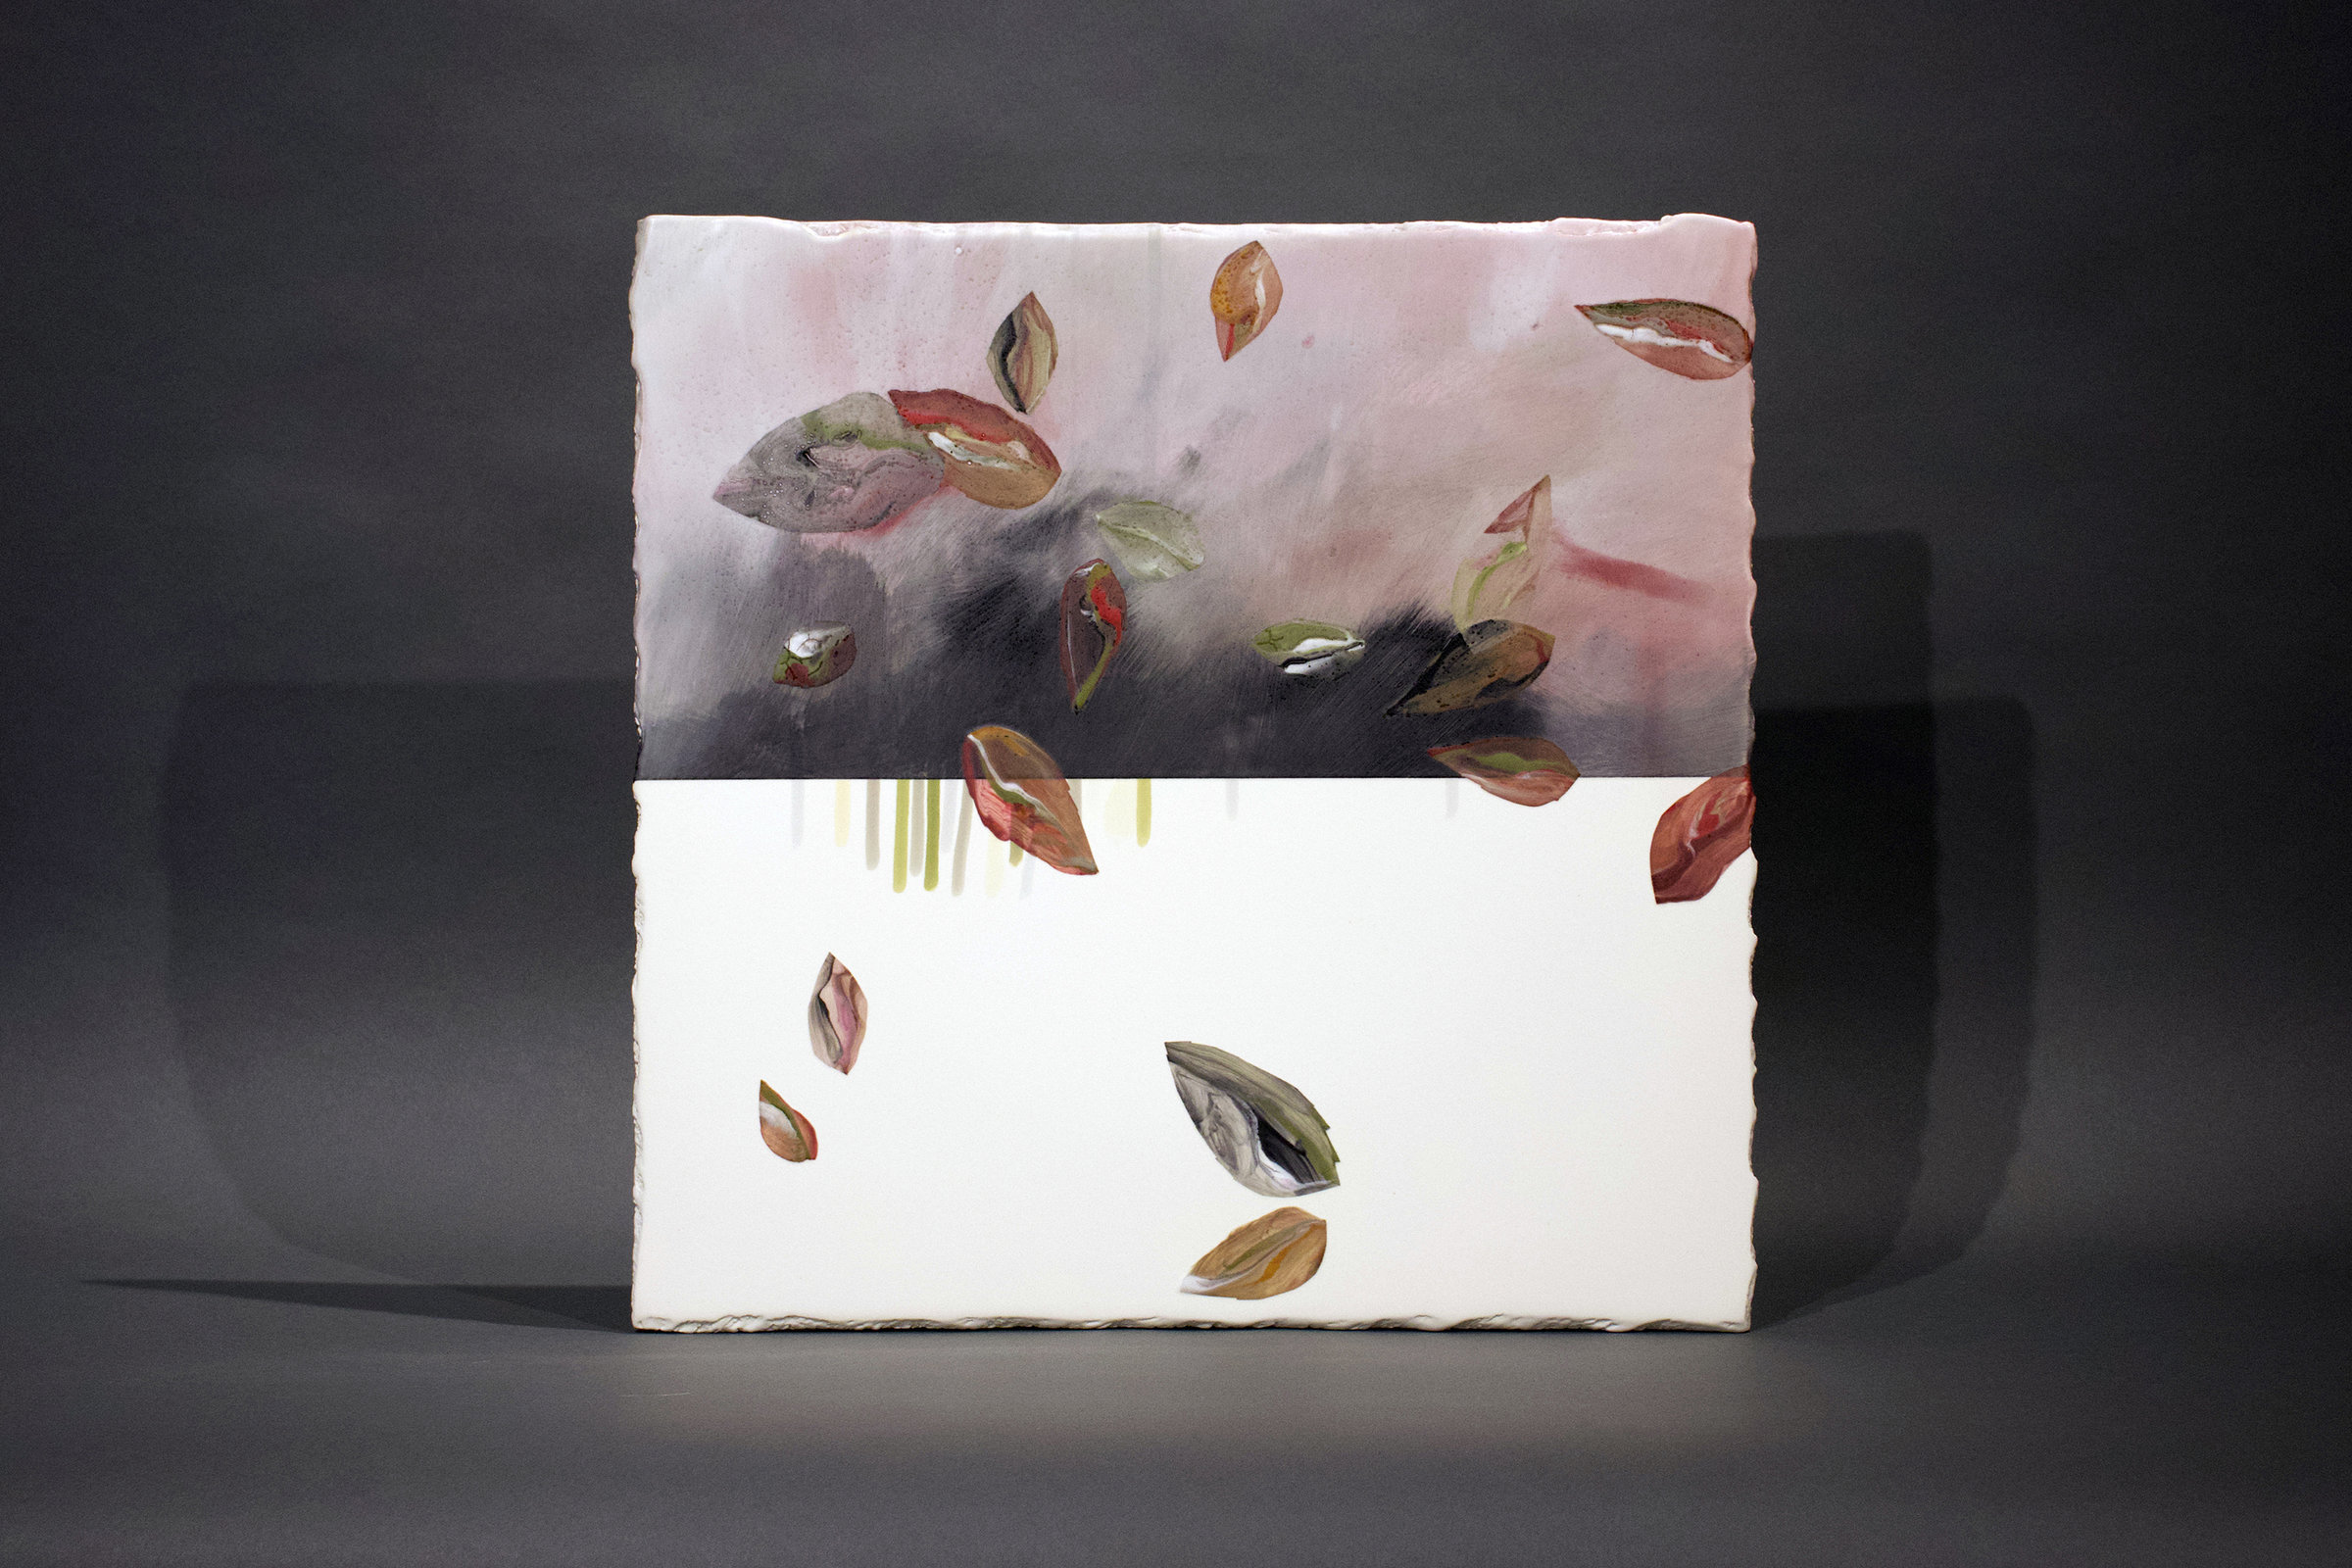 Autumn Leaf by James Aarons (Ceramic Wall Sculpture) | Artful Home